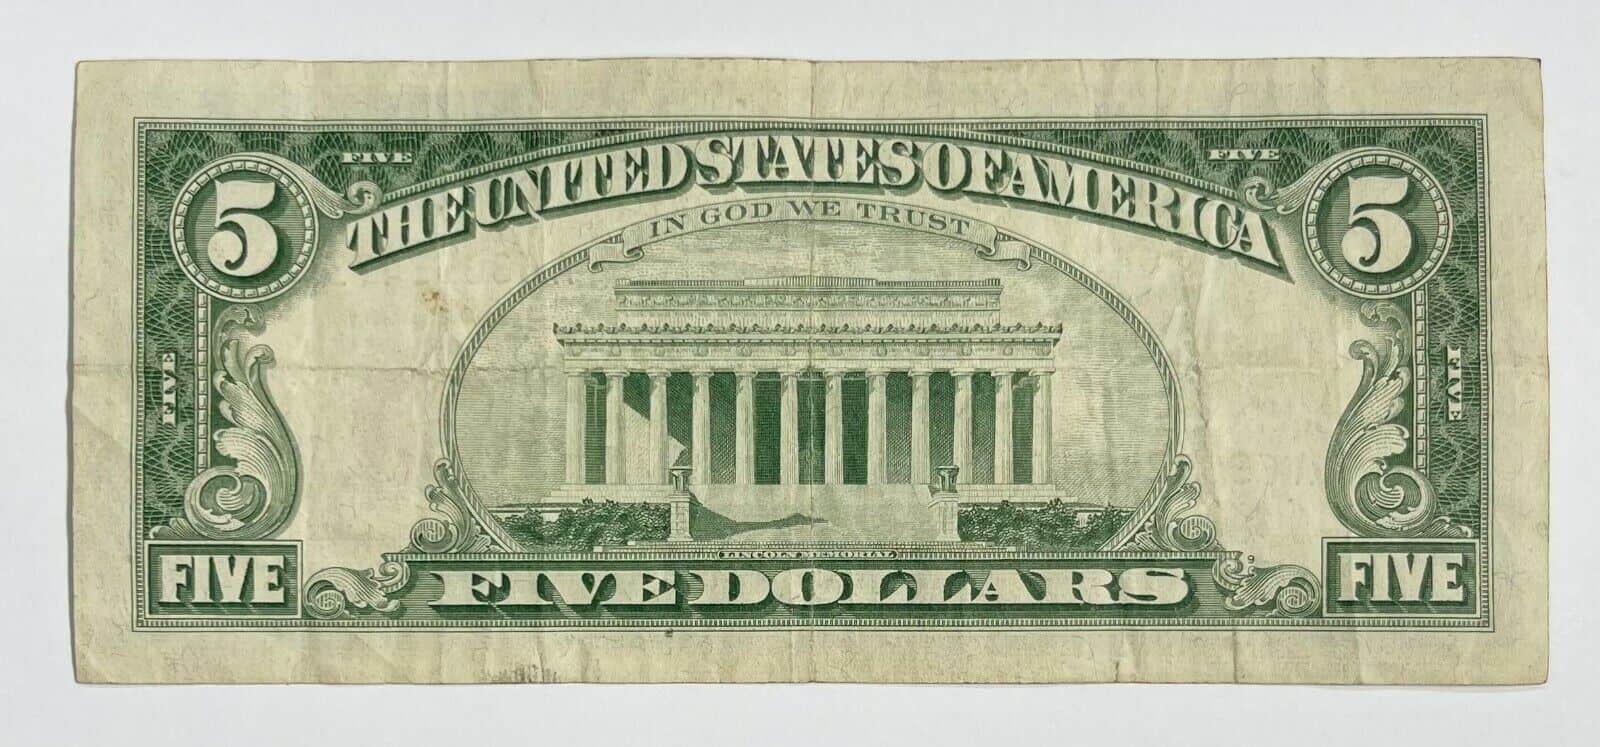 The back page of the 1963 $5 bill